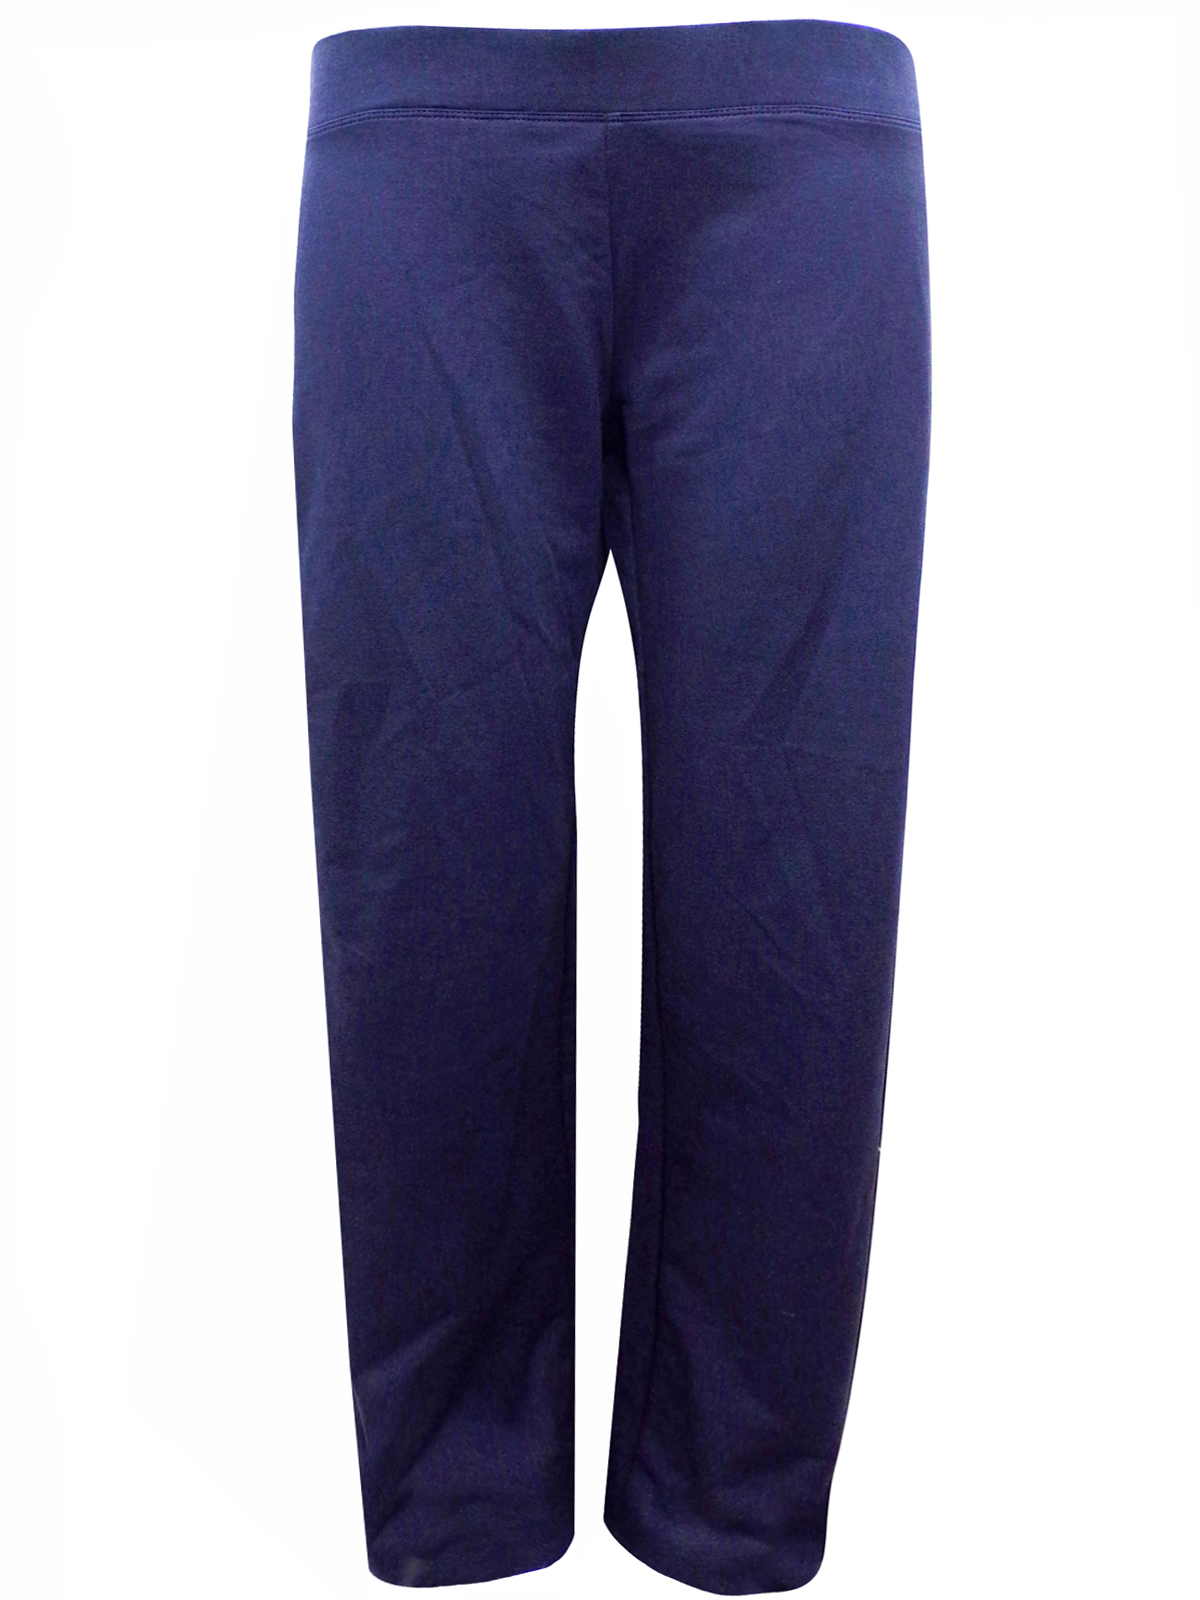 Marks and Spencer - - M&5 ASSORTED Joggers - Size 10 to 20